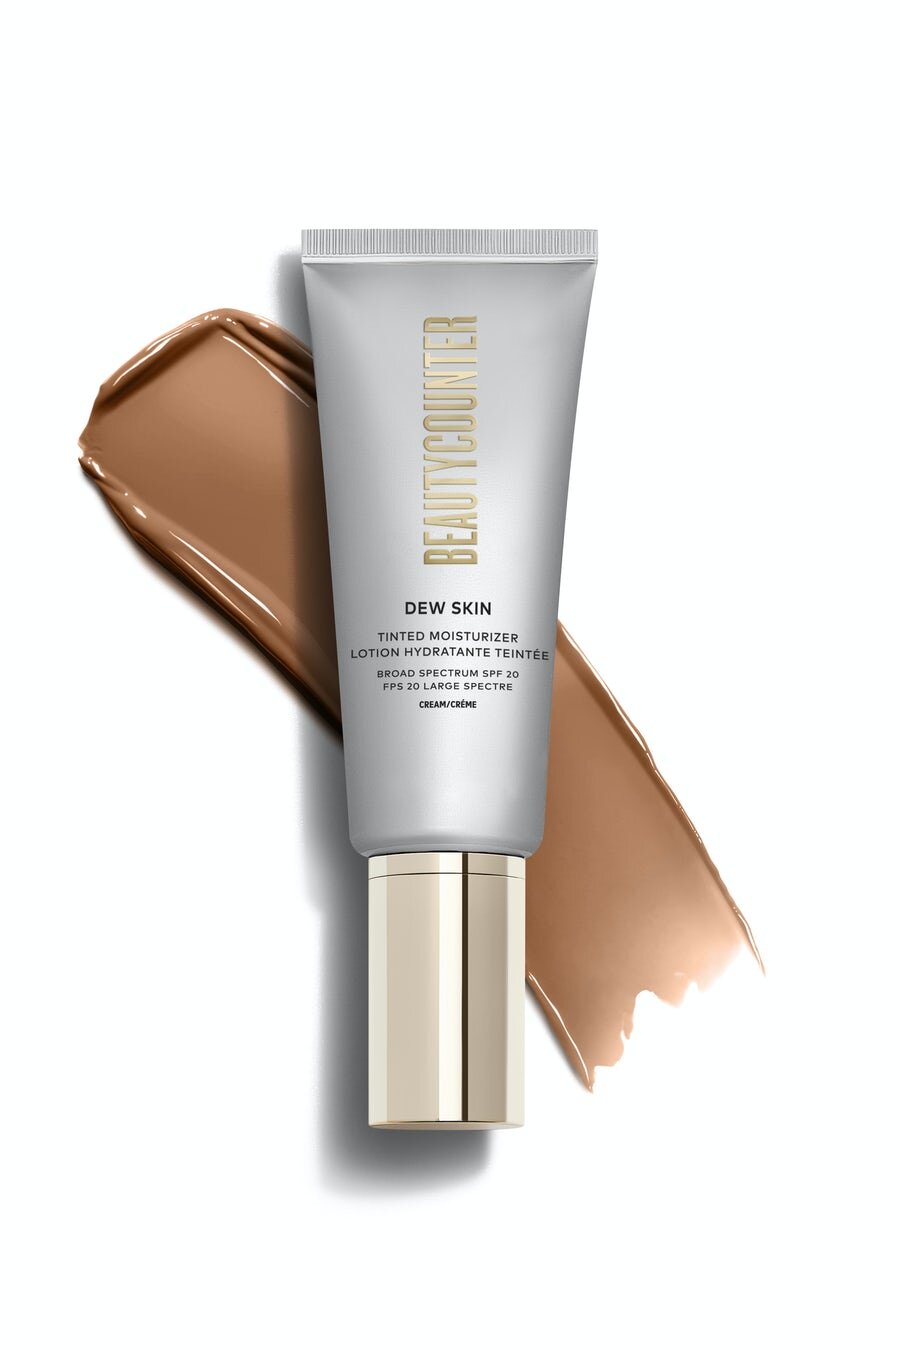 If you don’t want to wear something heavy this summer, try this sheer-coverage tinted moisturizer that helps even skin tone and has SPF 20 mineral sunscreen built in!